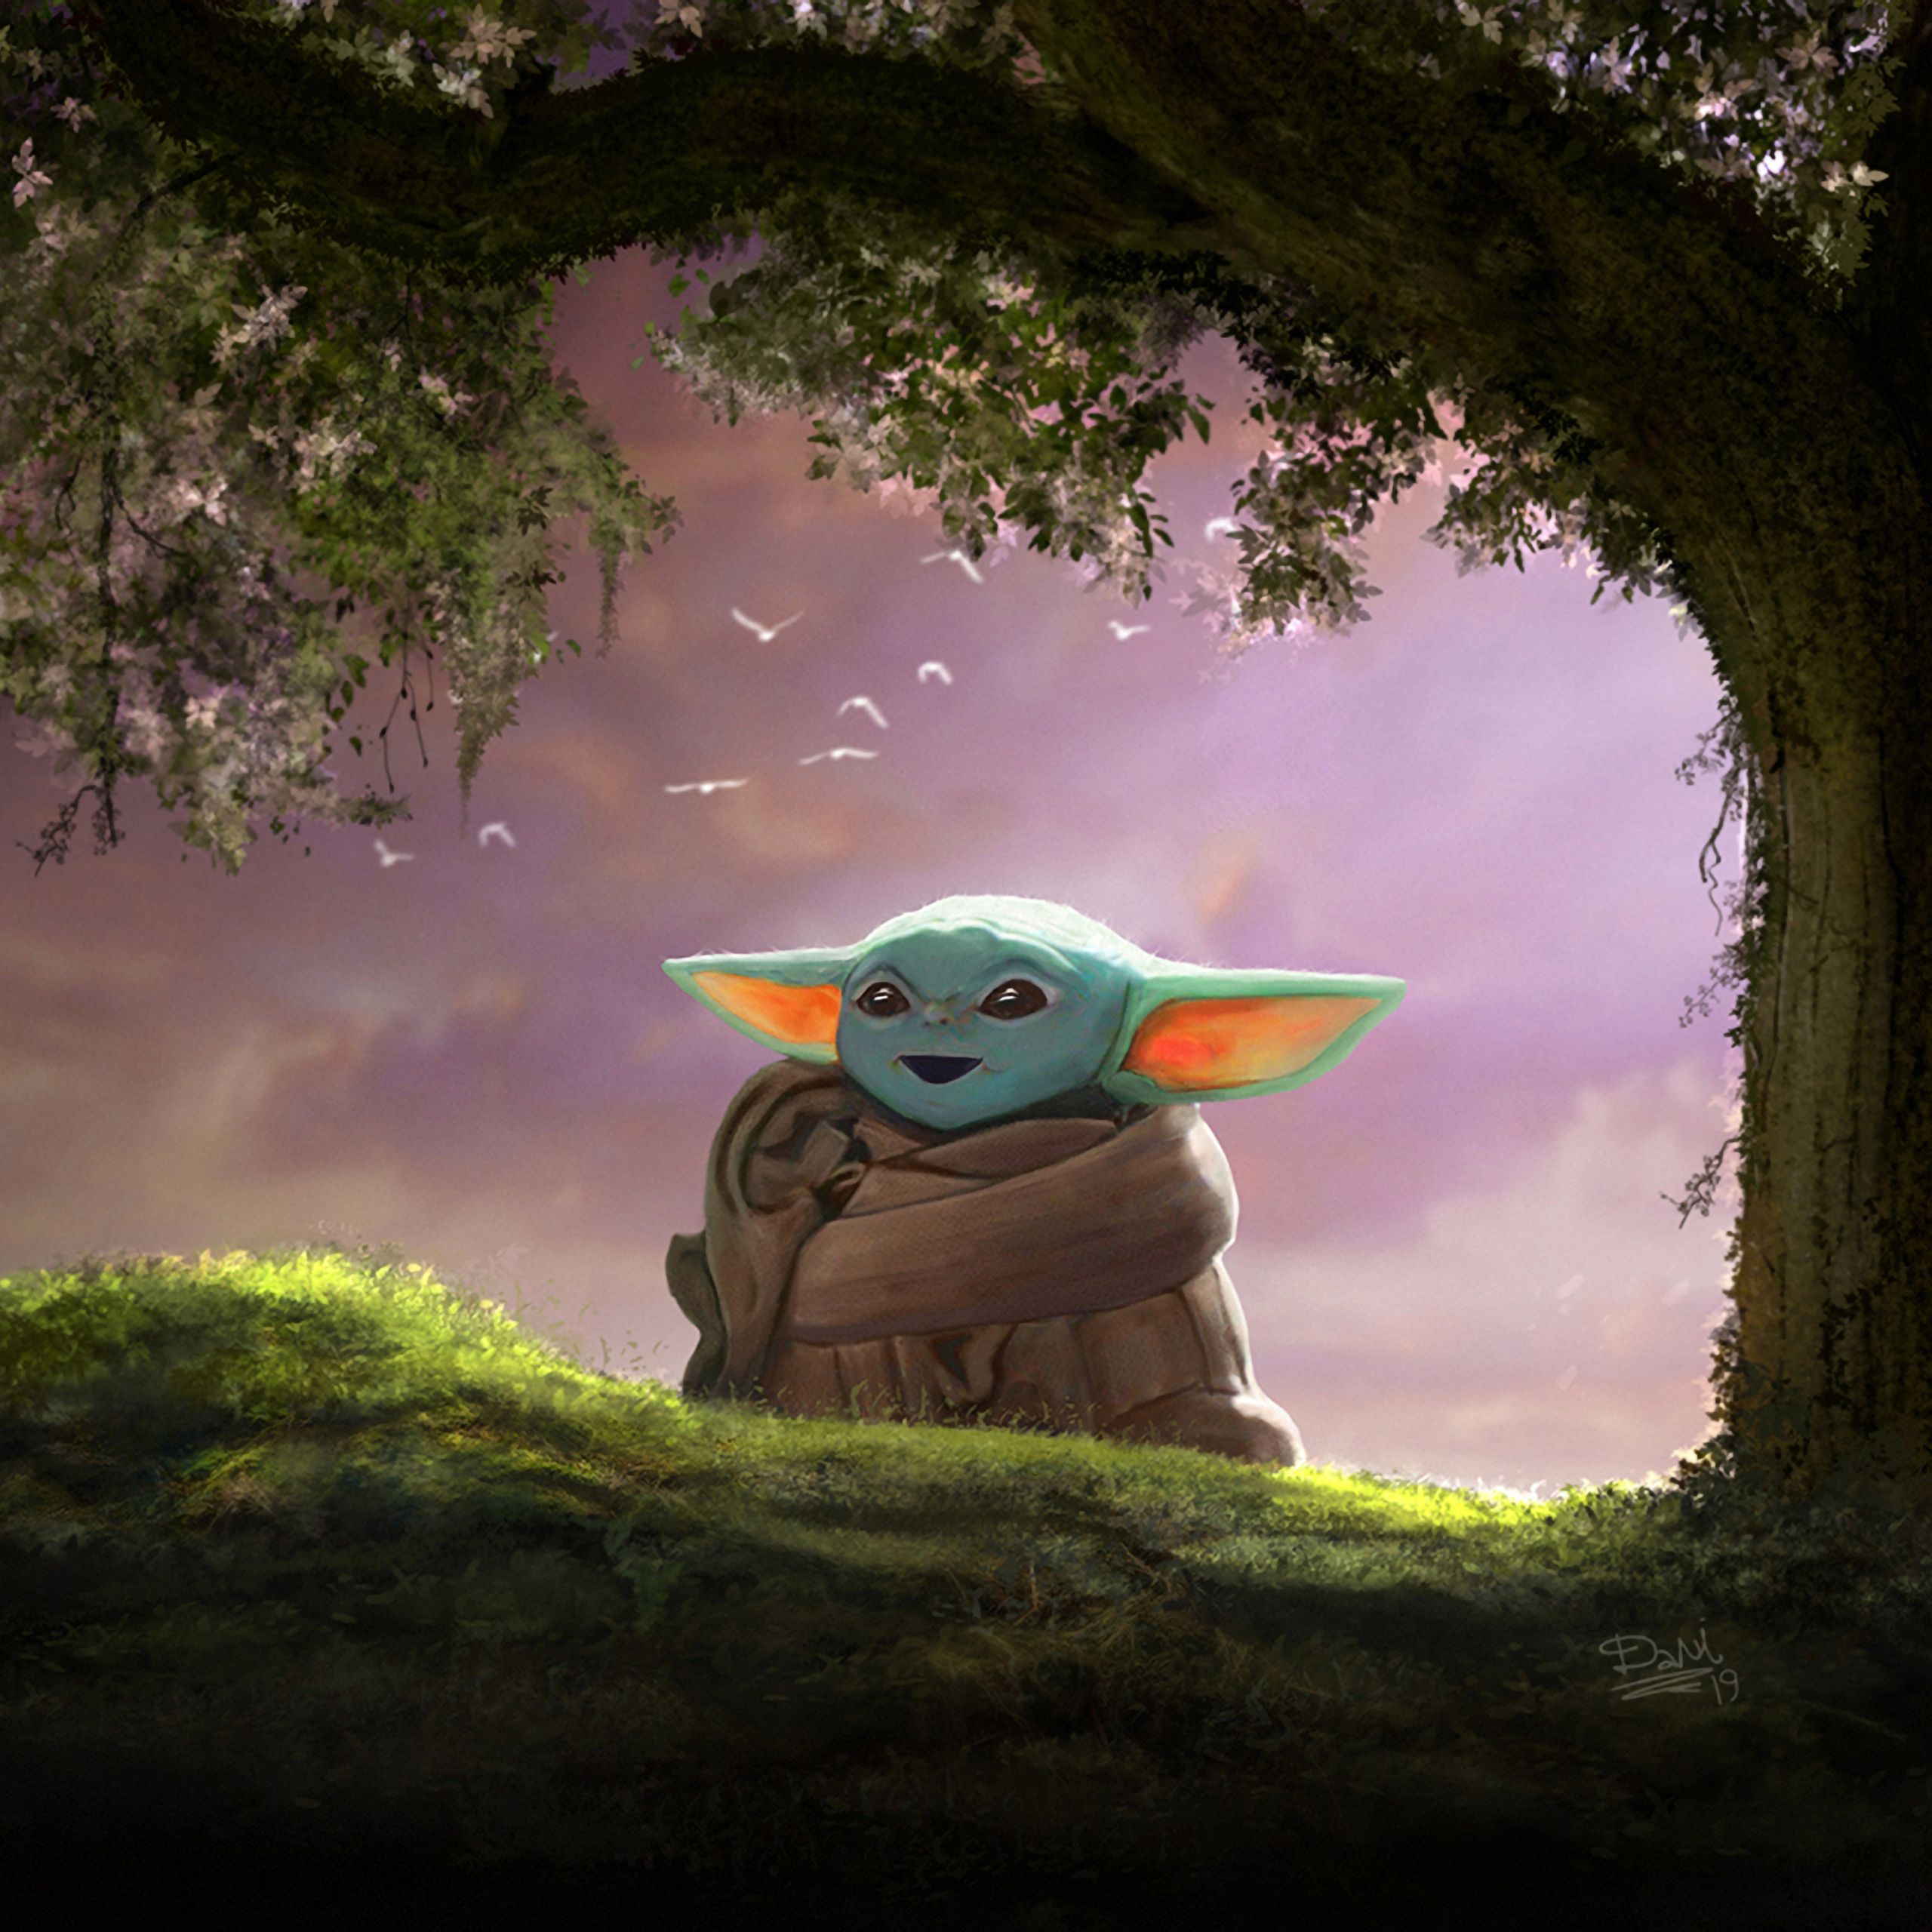 Wallpaper Weekends: The Child (Baby Yoda) Wallpaper for iPhone and iPad